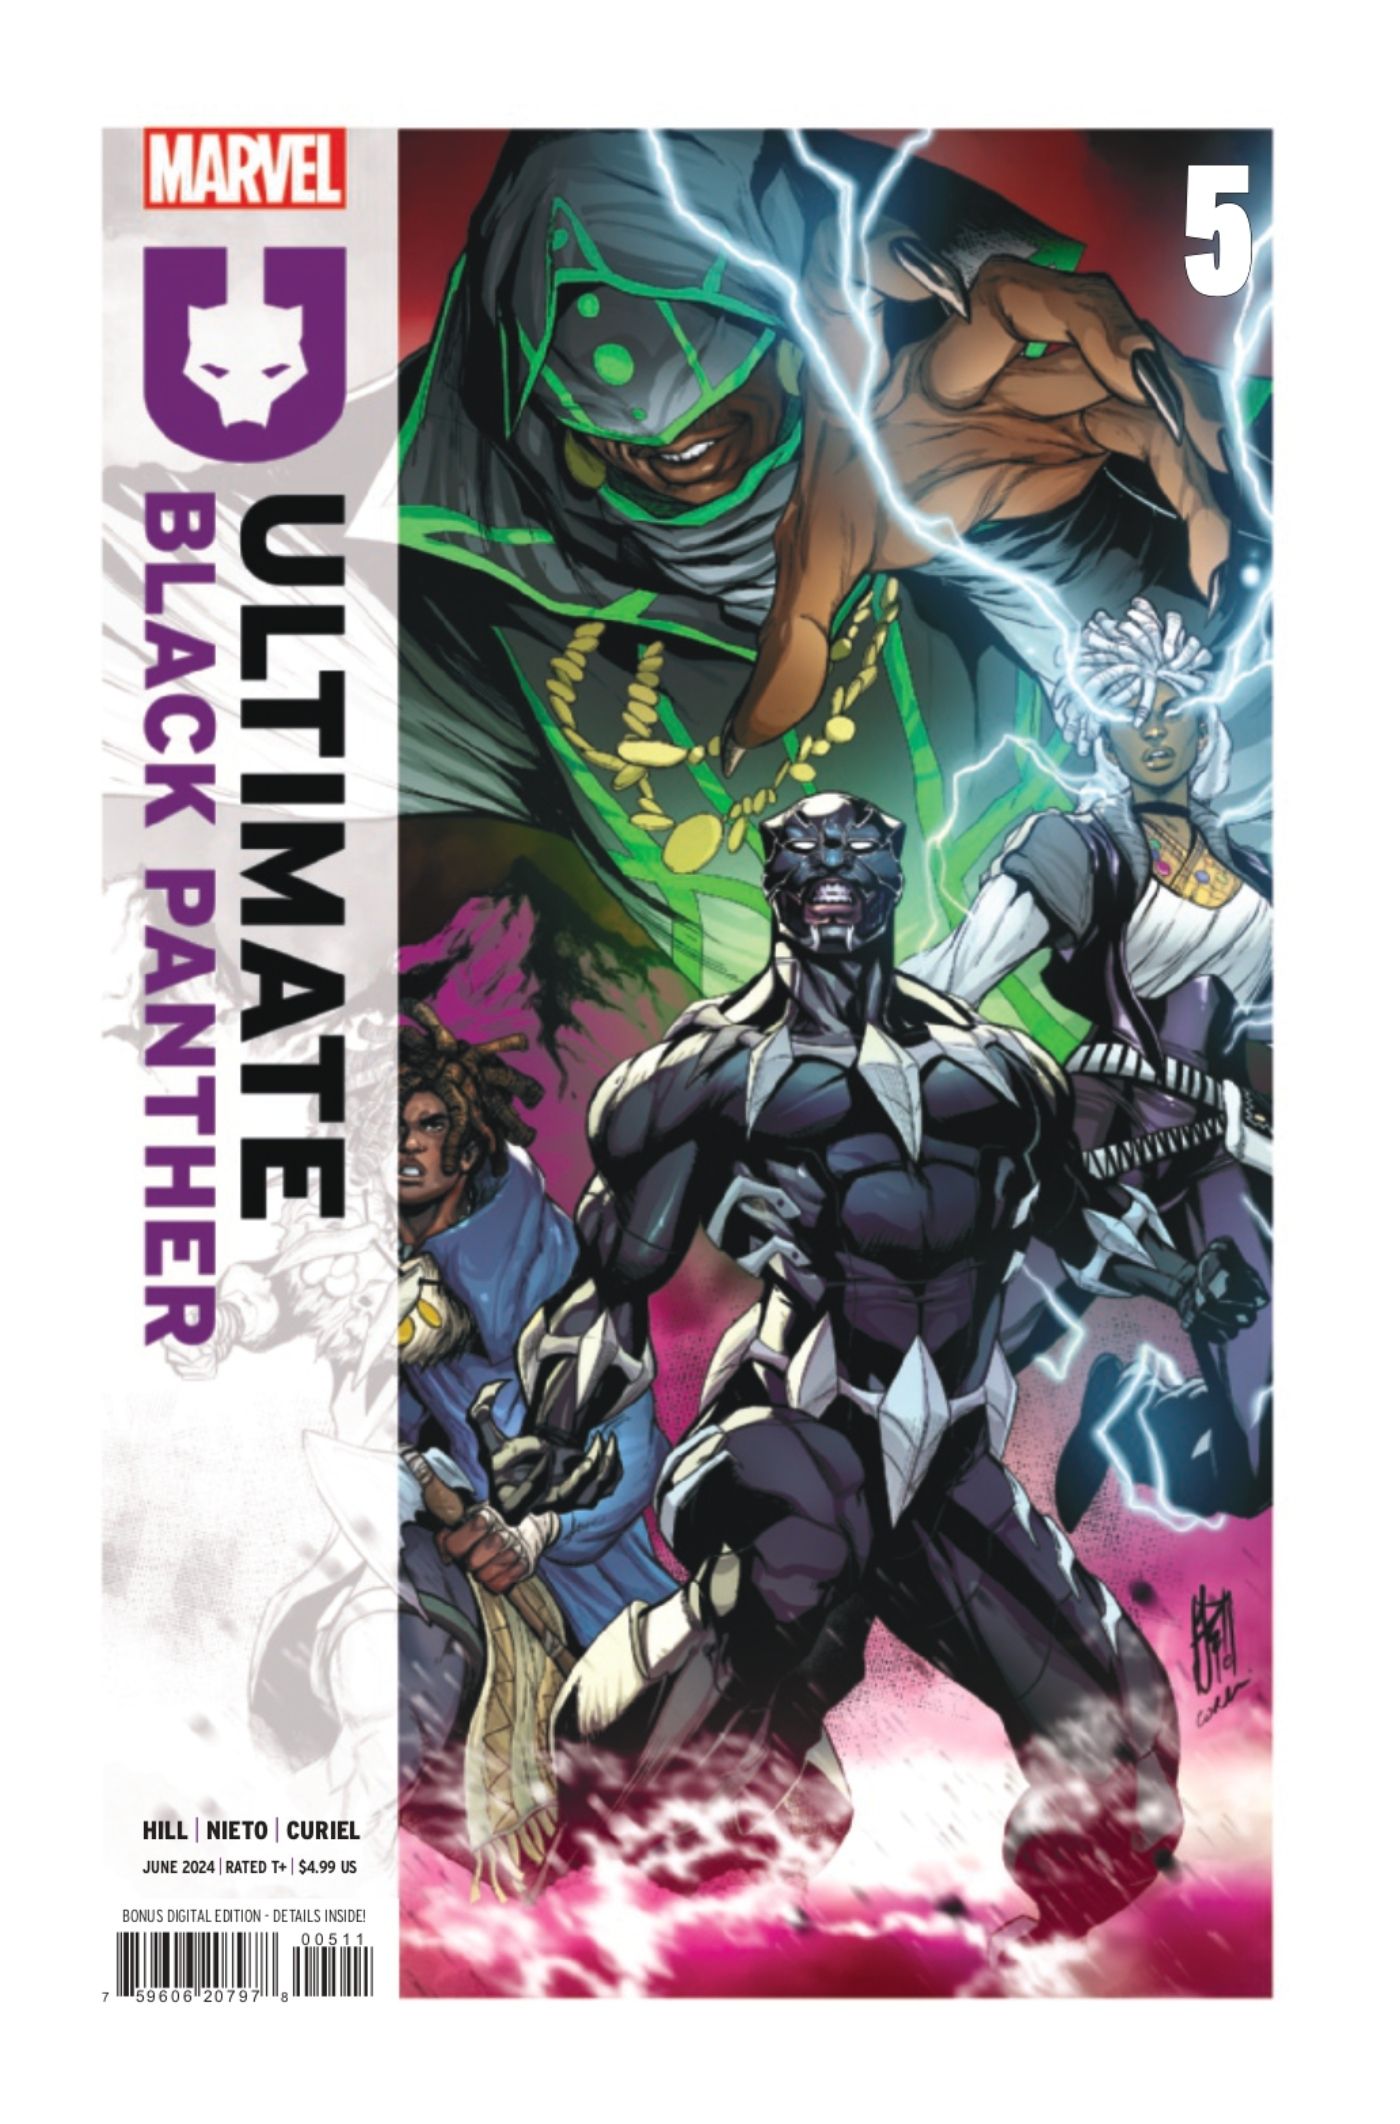 Ultimate Black Panther #5 cover featuring Black Panther with Killmonger and Storm.